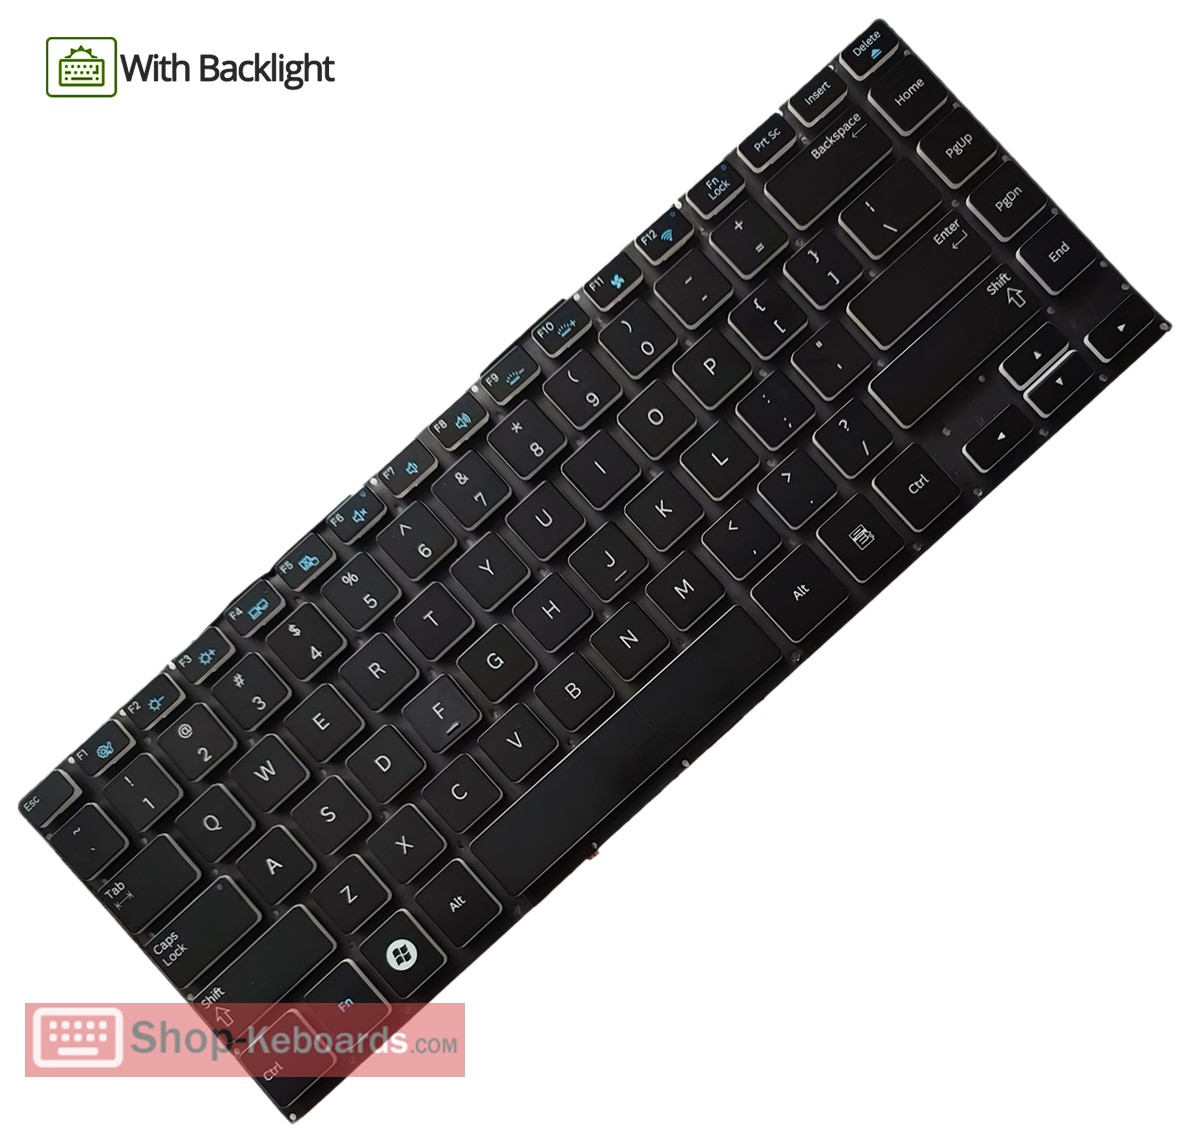 Samsung NPnp700z4a-s02ph-S02PH  Keyboard replacement